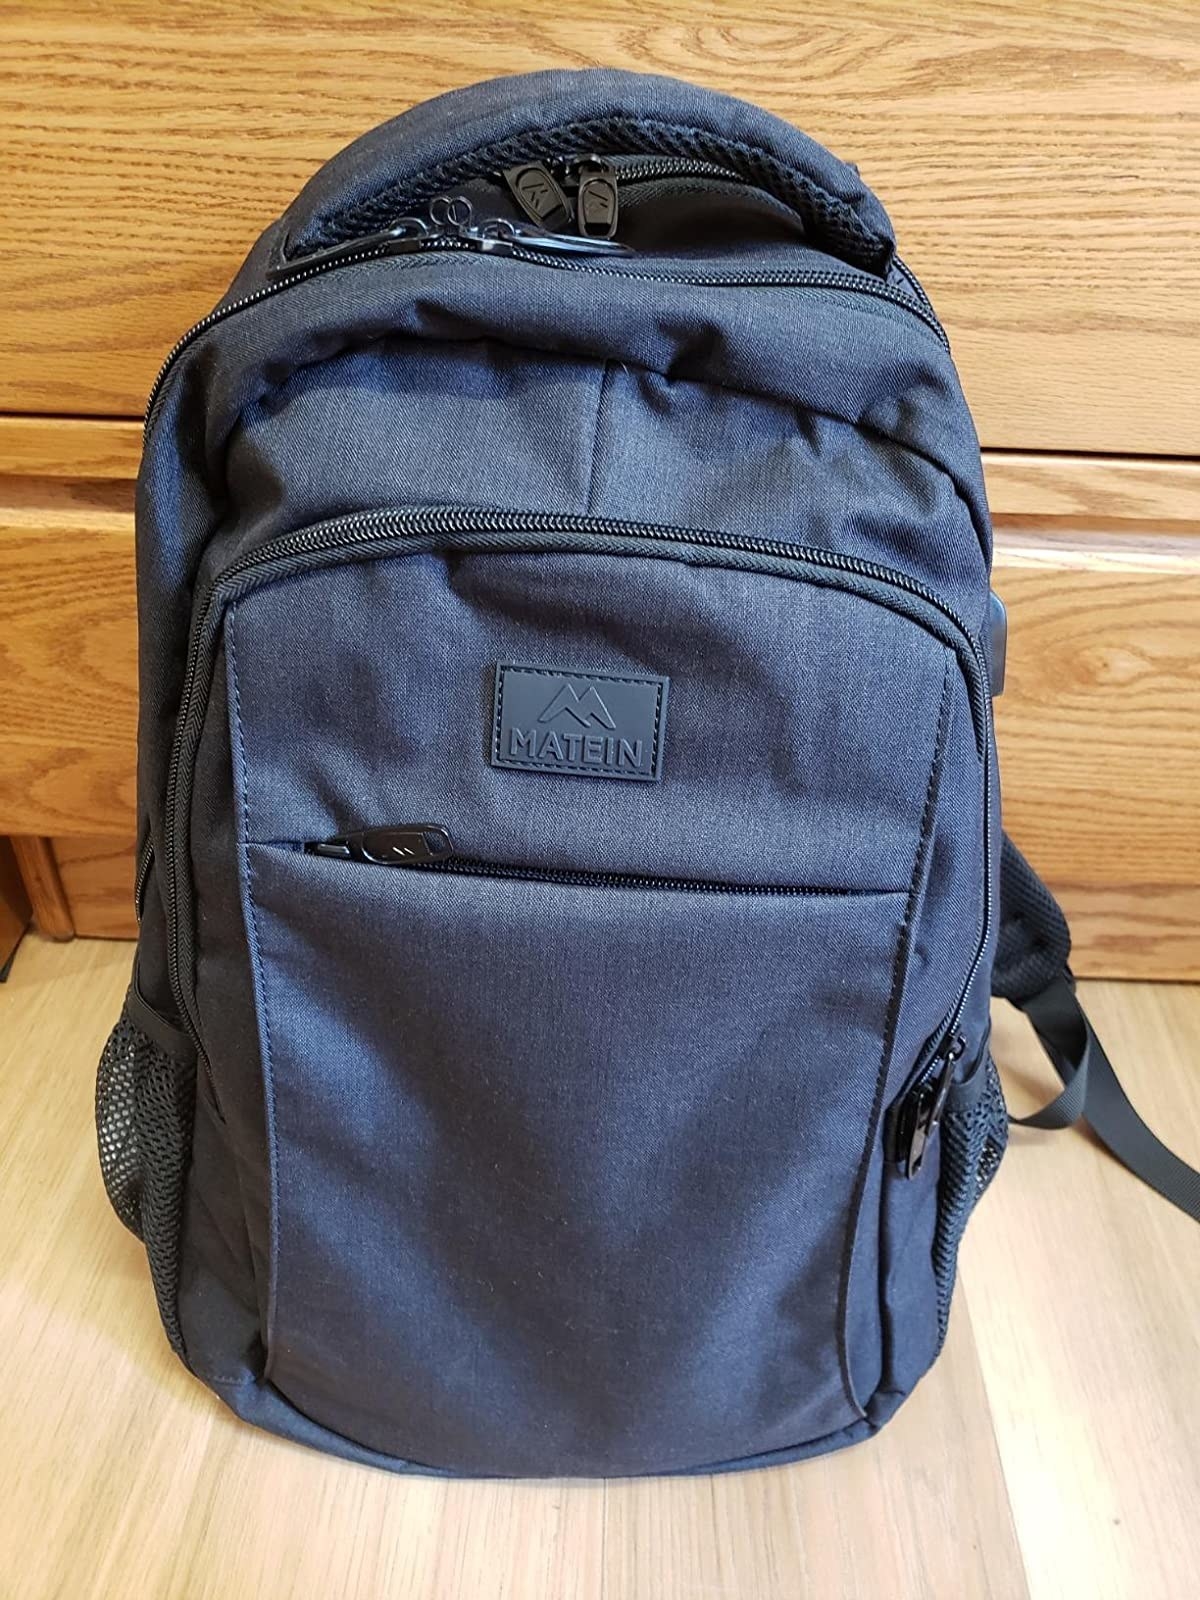 Reviewer photo of the navy blue backpack